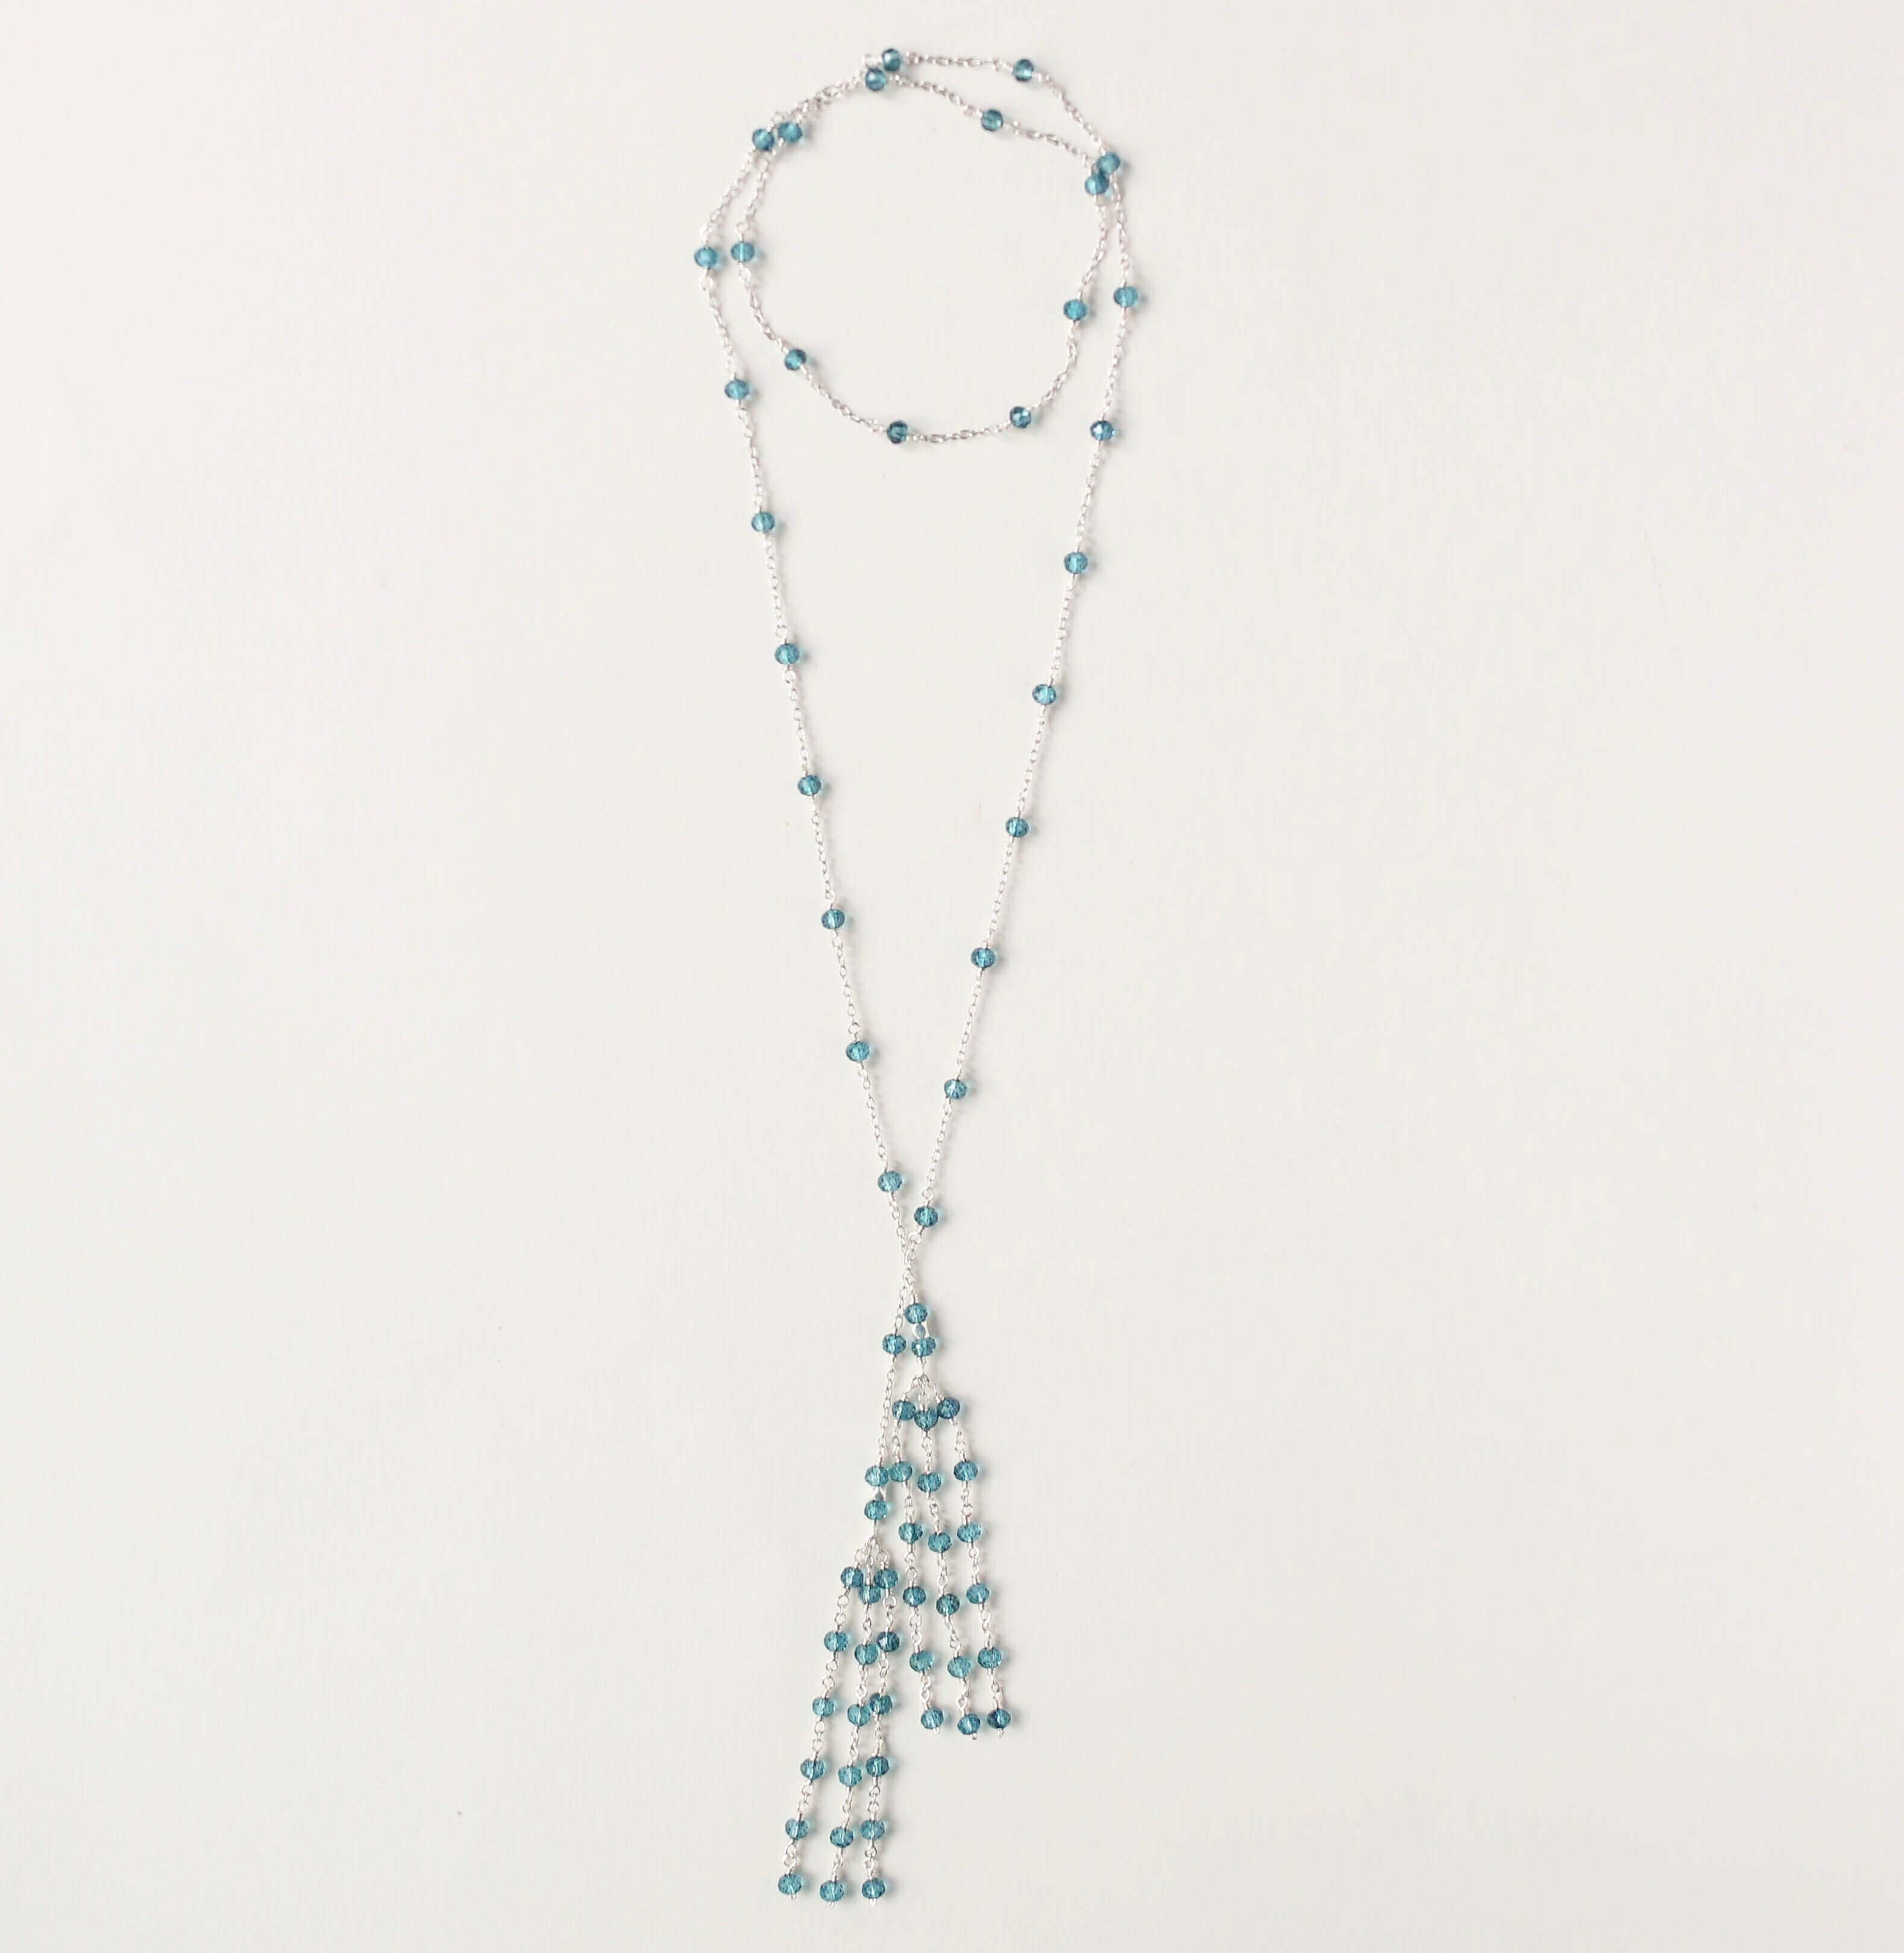 Silver plated London Blue Quartz Lariat Necklace with a stunning tassel